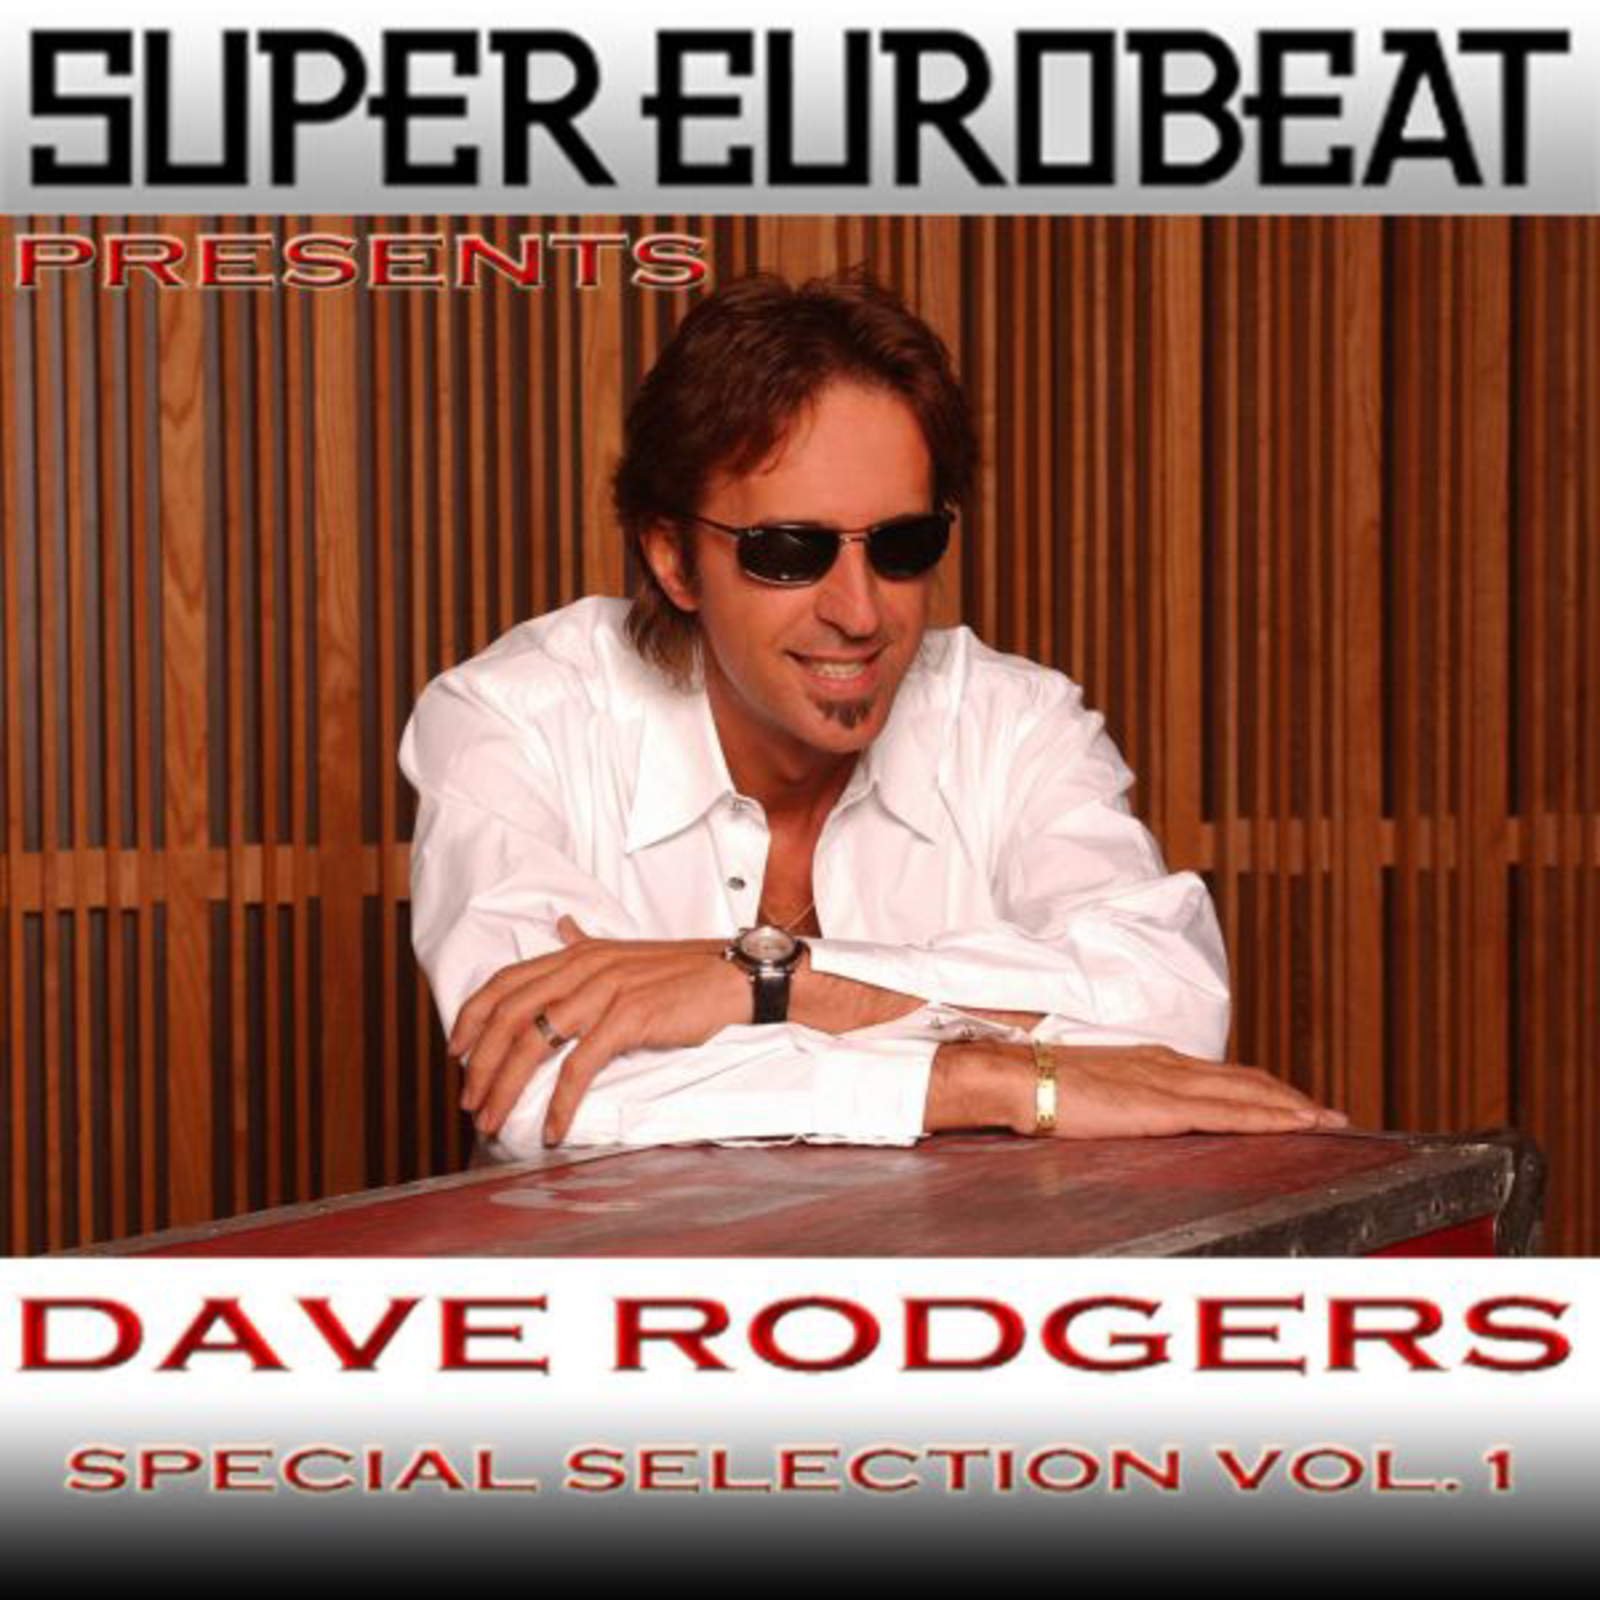 SUPER EUROBEAT presents DAVE RODGERS Special COLLECTION Vol.1专辑